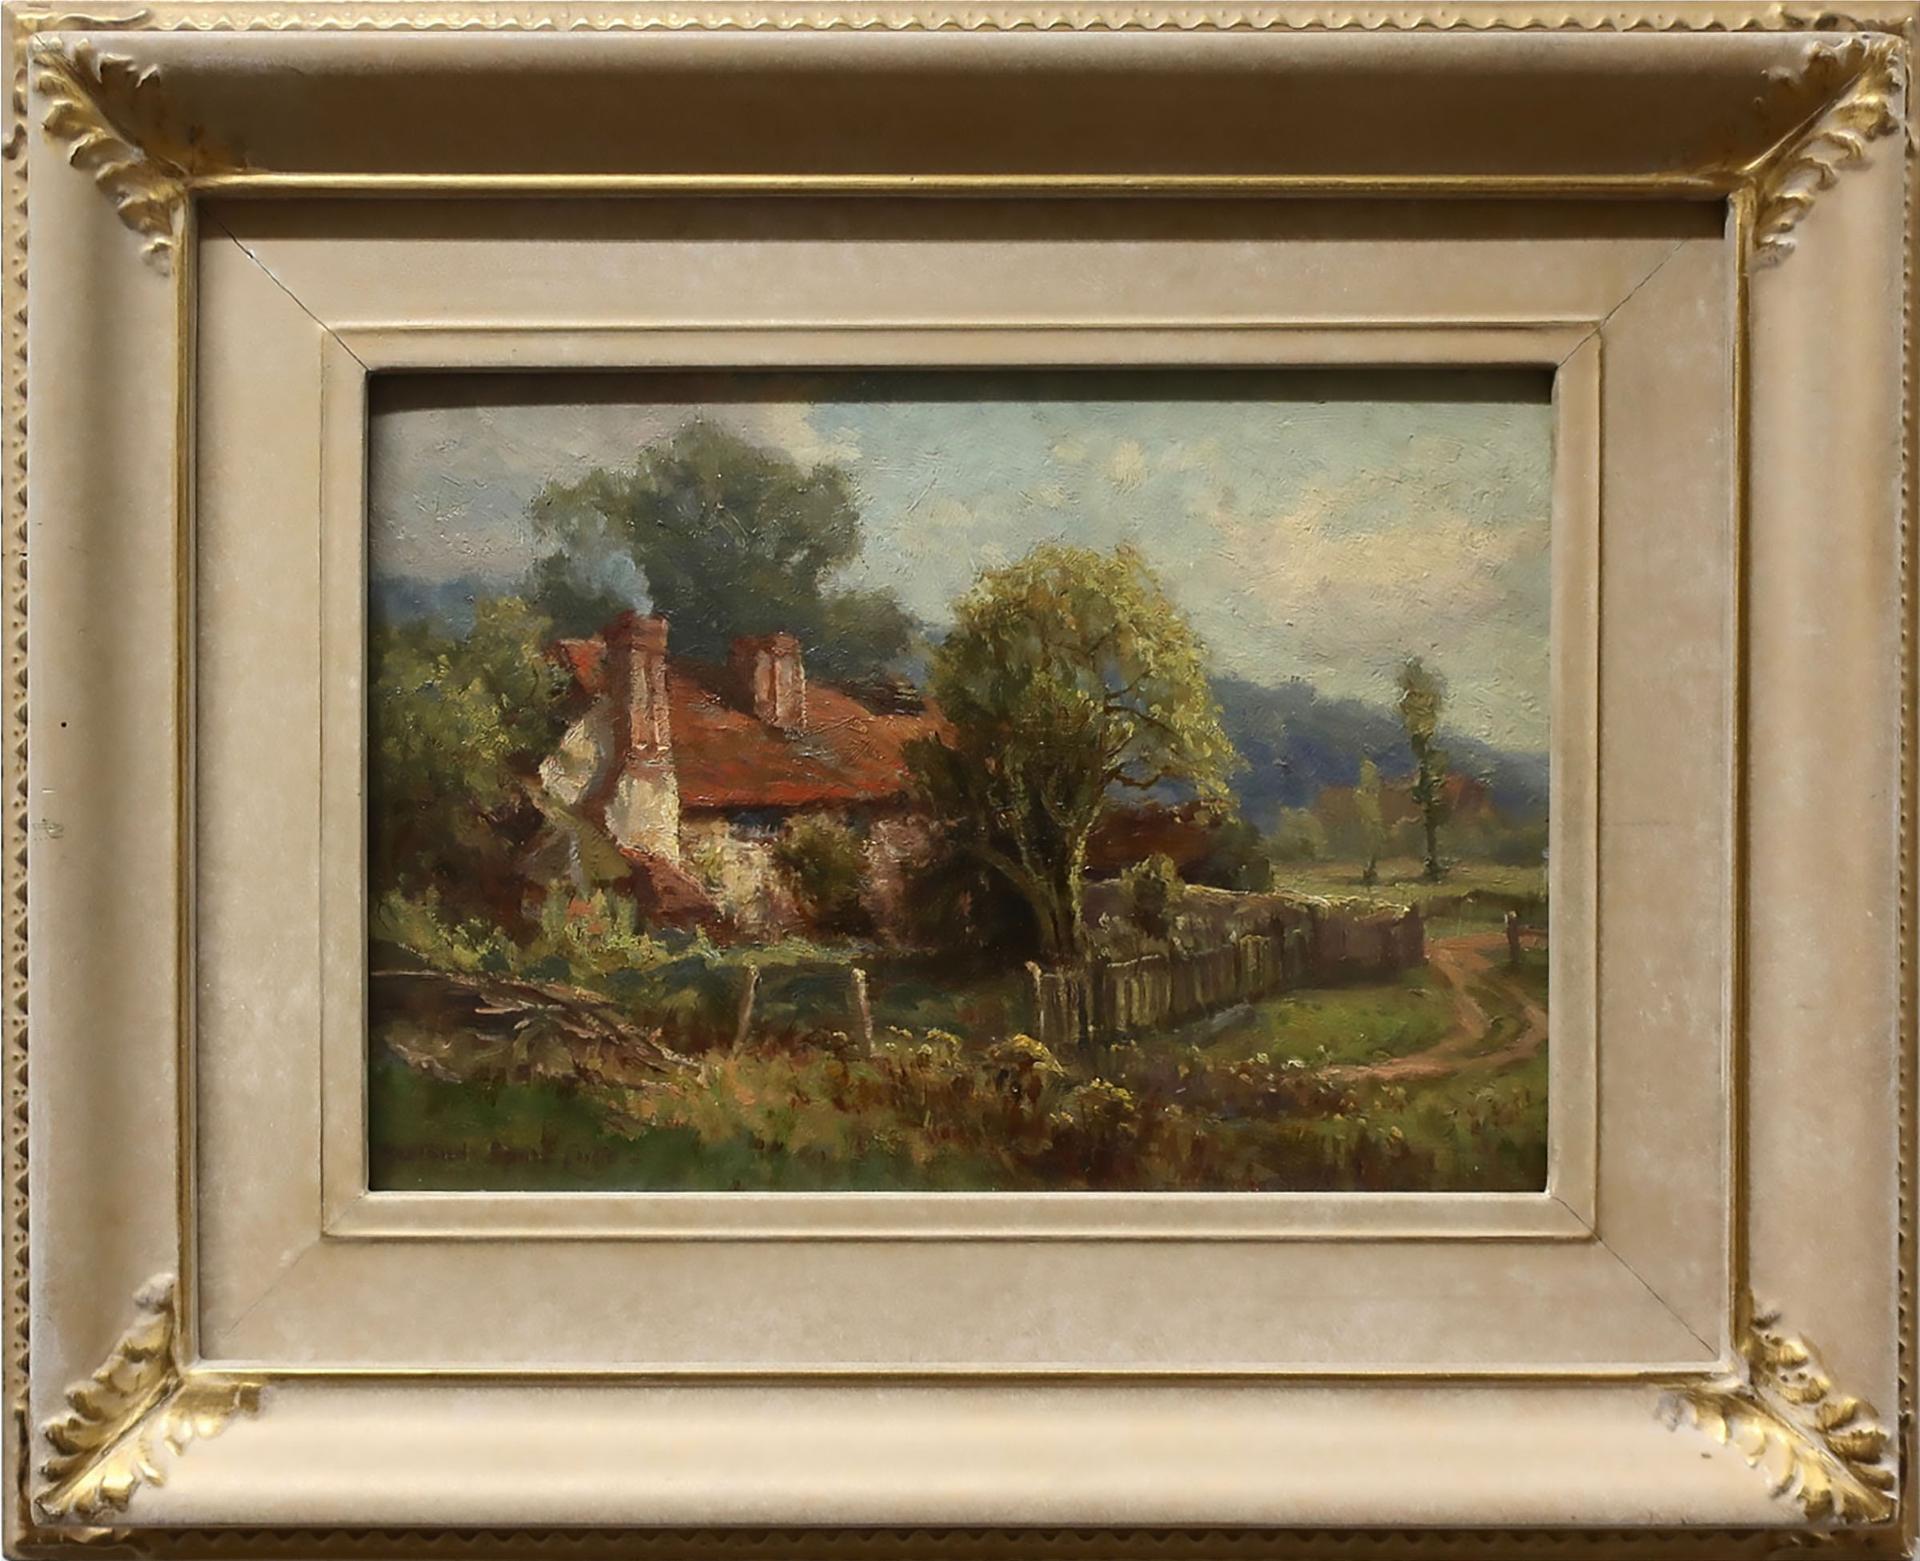 Gertrude Eleanor Spurr Cutts (1858-1941) - Untitled (Old English Cottage)